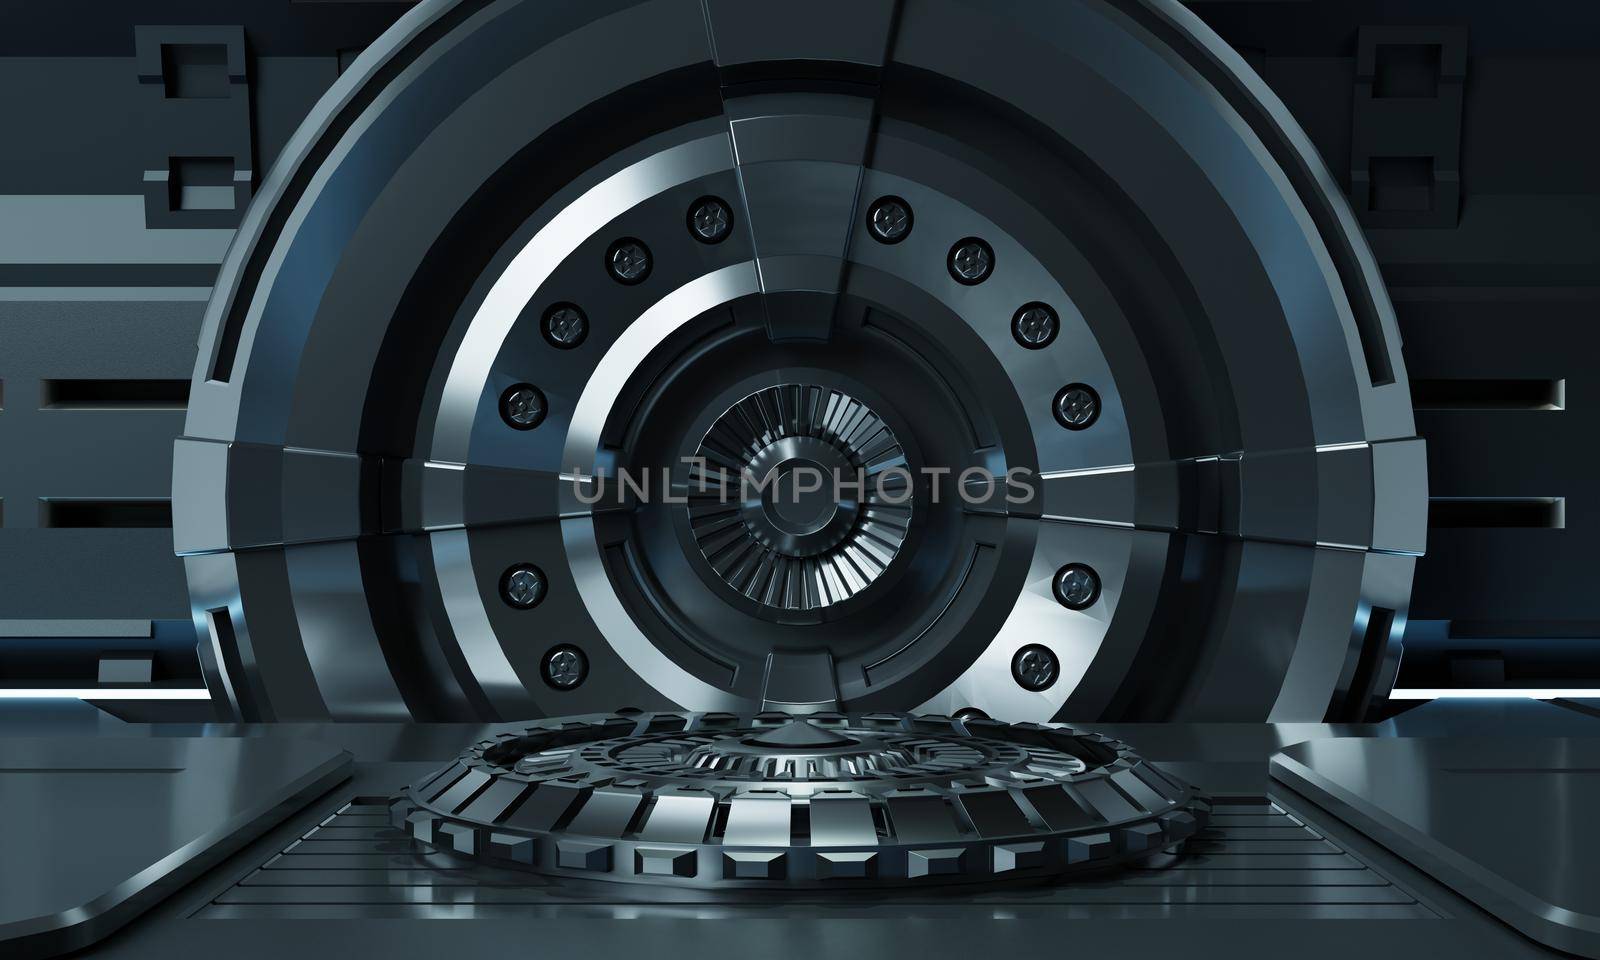 Sci-fi product podium showcase inside spaceship with security metal gate background. Technology and object concept. 3D illustration rendering by MiniStocker